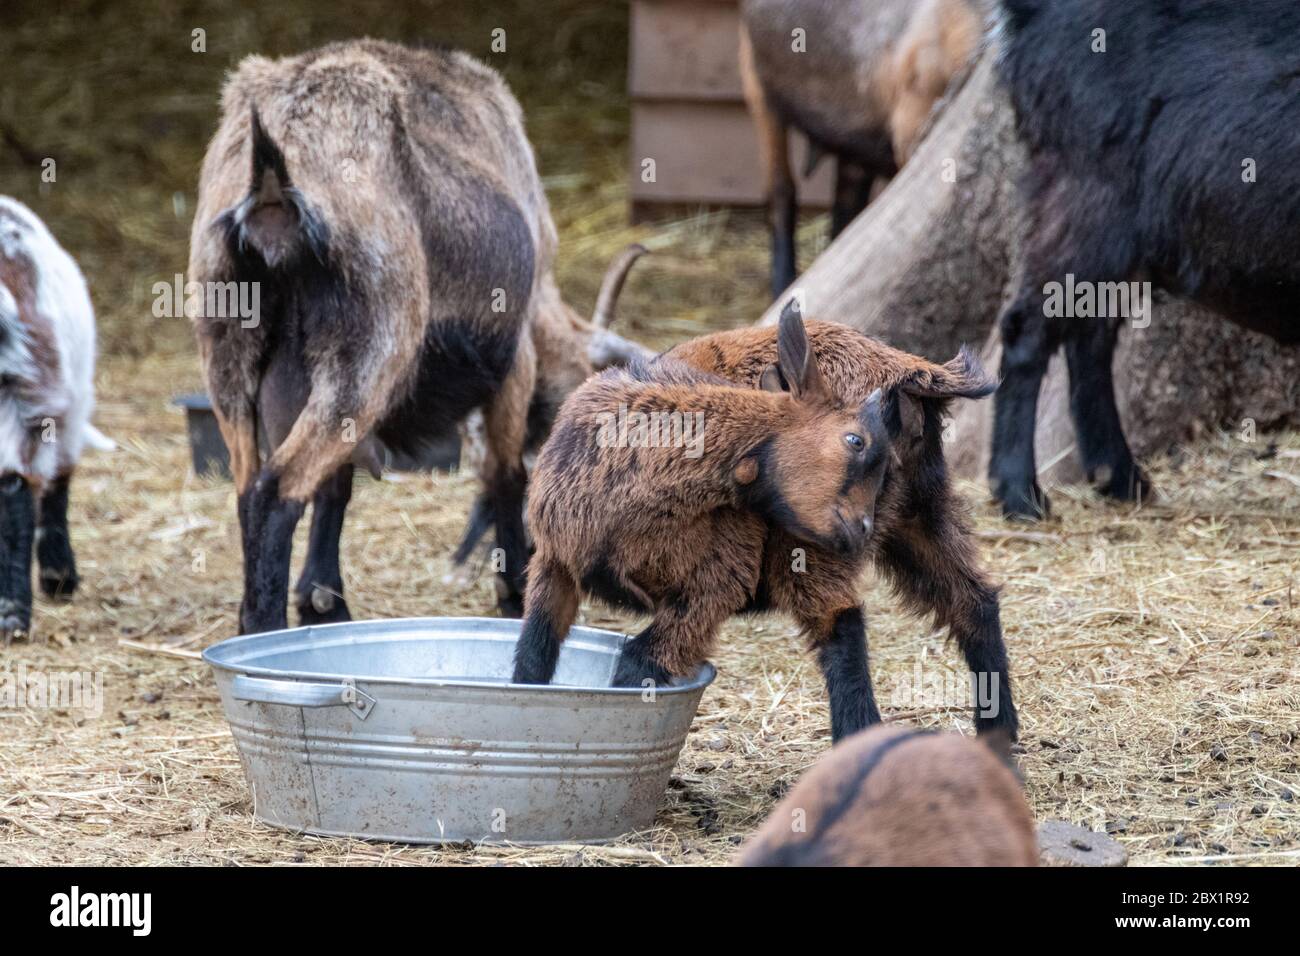 A cute playful baby brown goat standing in metal bucket on straw bedding in an animal farm yard Stock Photo